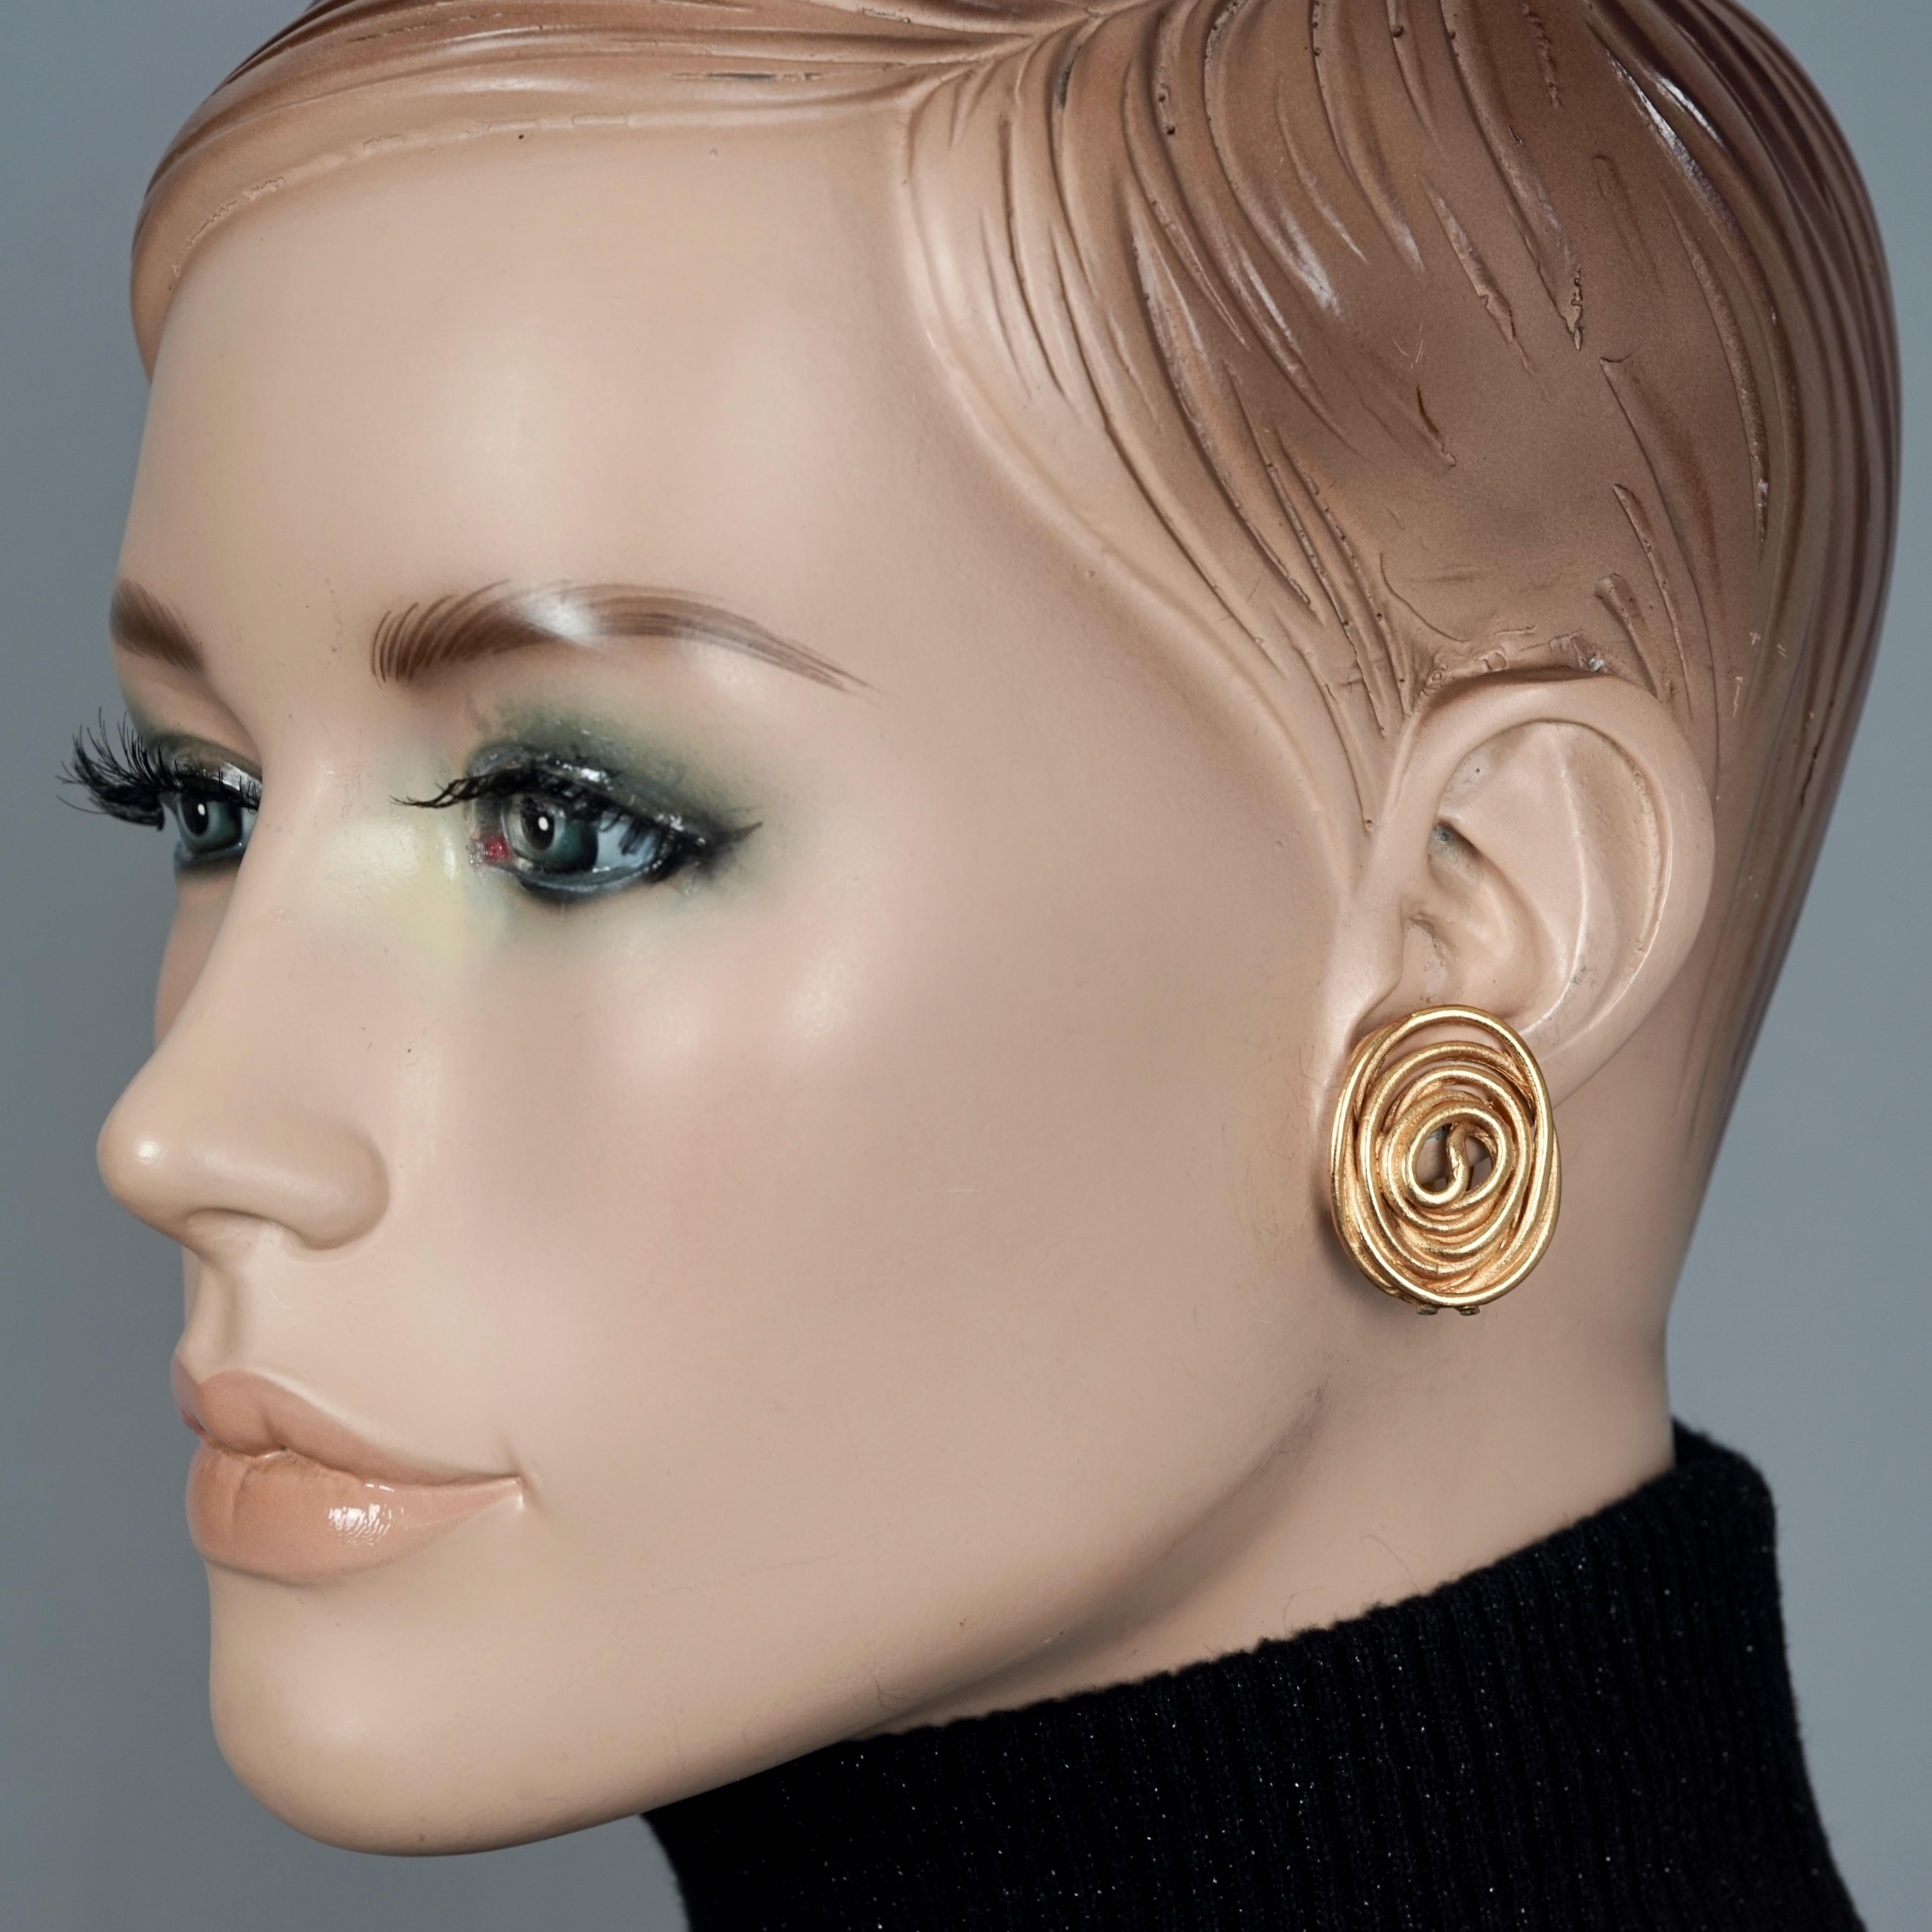 Vintage BALENCIAGA Spiral Earrings

Measurements:
Height: 1.14 inches (2.9 cm)
Width: 0.86 inch (2.2 cm)
Weight per Earring: 7 grams

Features:
- 100% Authentic BALENCIAGA.
- Oval wire spiral pattern.
- Gold tone hardware.
- Clip back earrings.
-